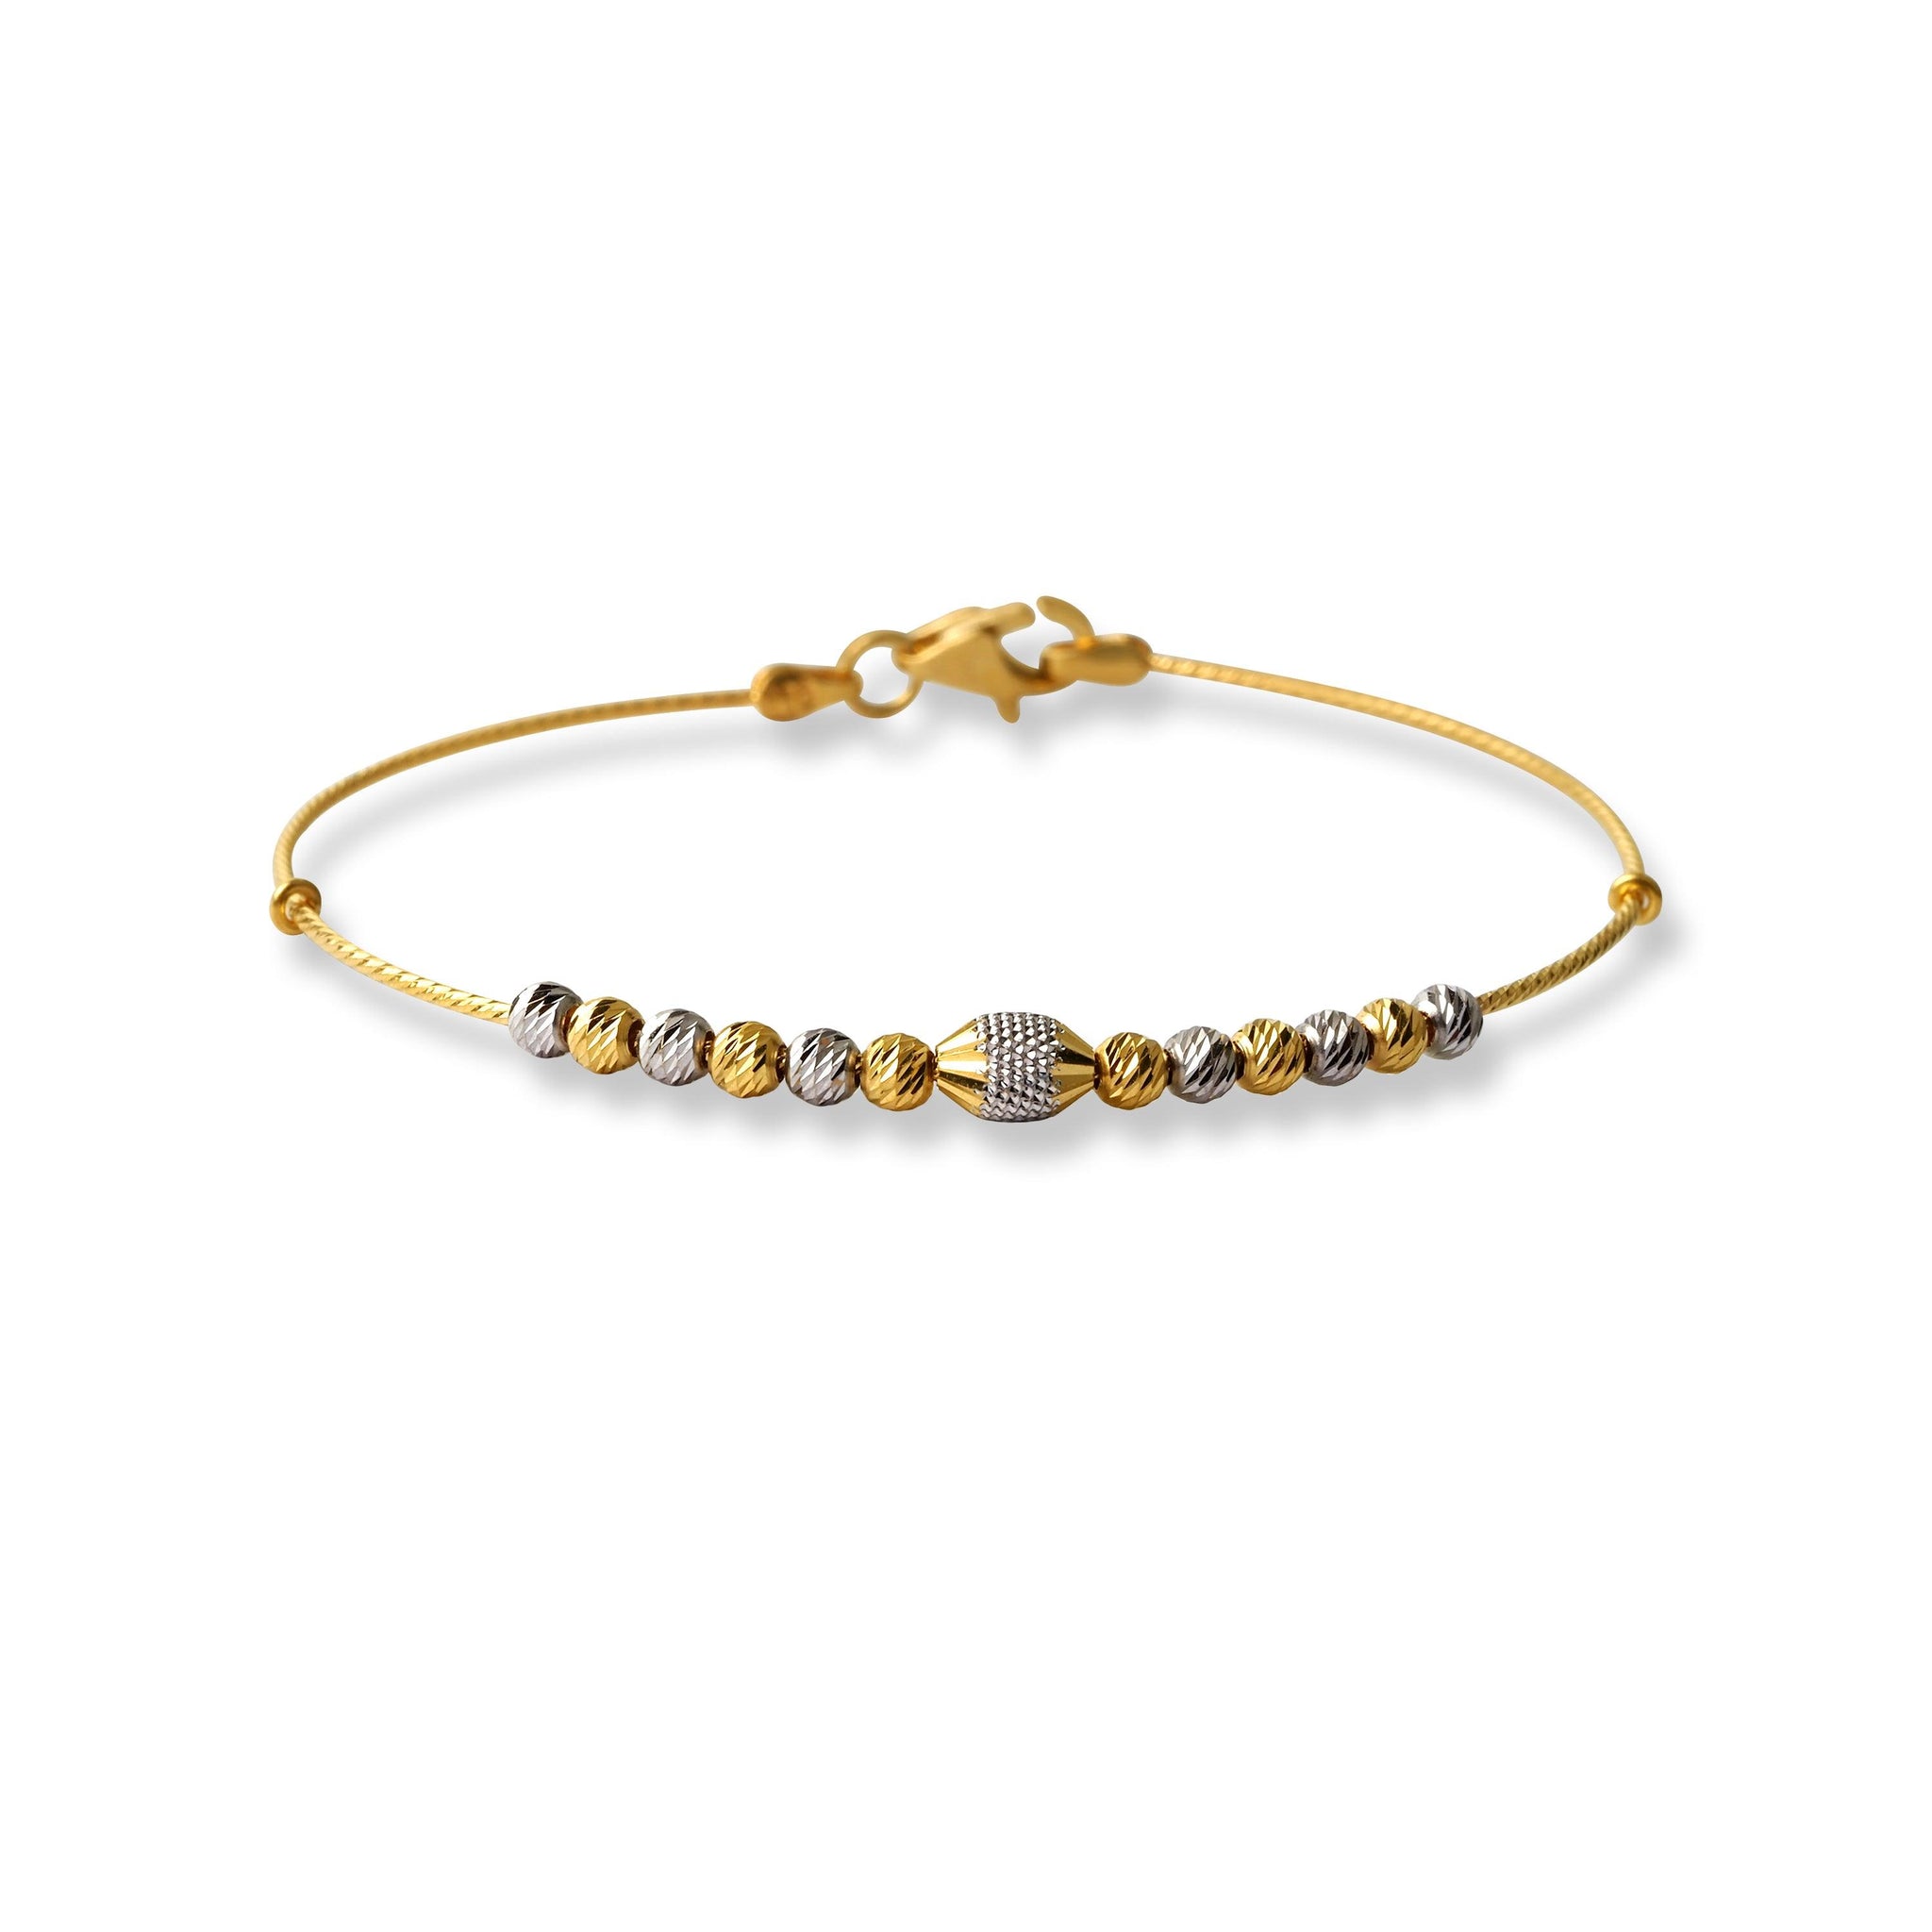 22ct Gold Rhodium Plated Beads Bangle With Rounded Trigger Clasp (4.1G) B-8524